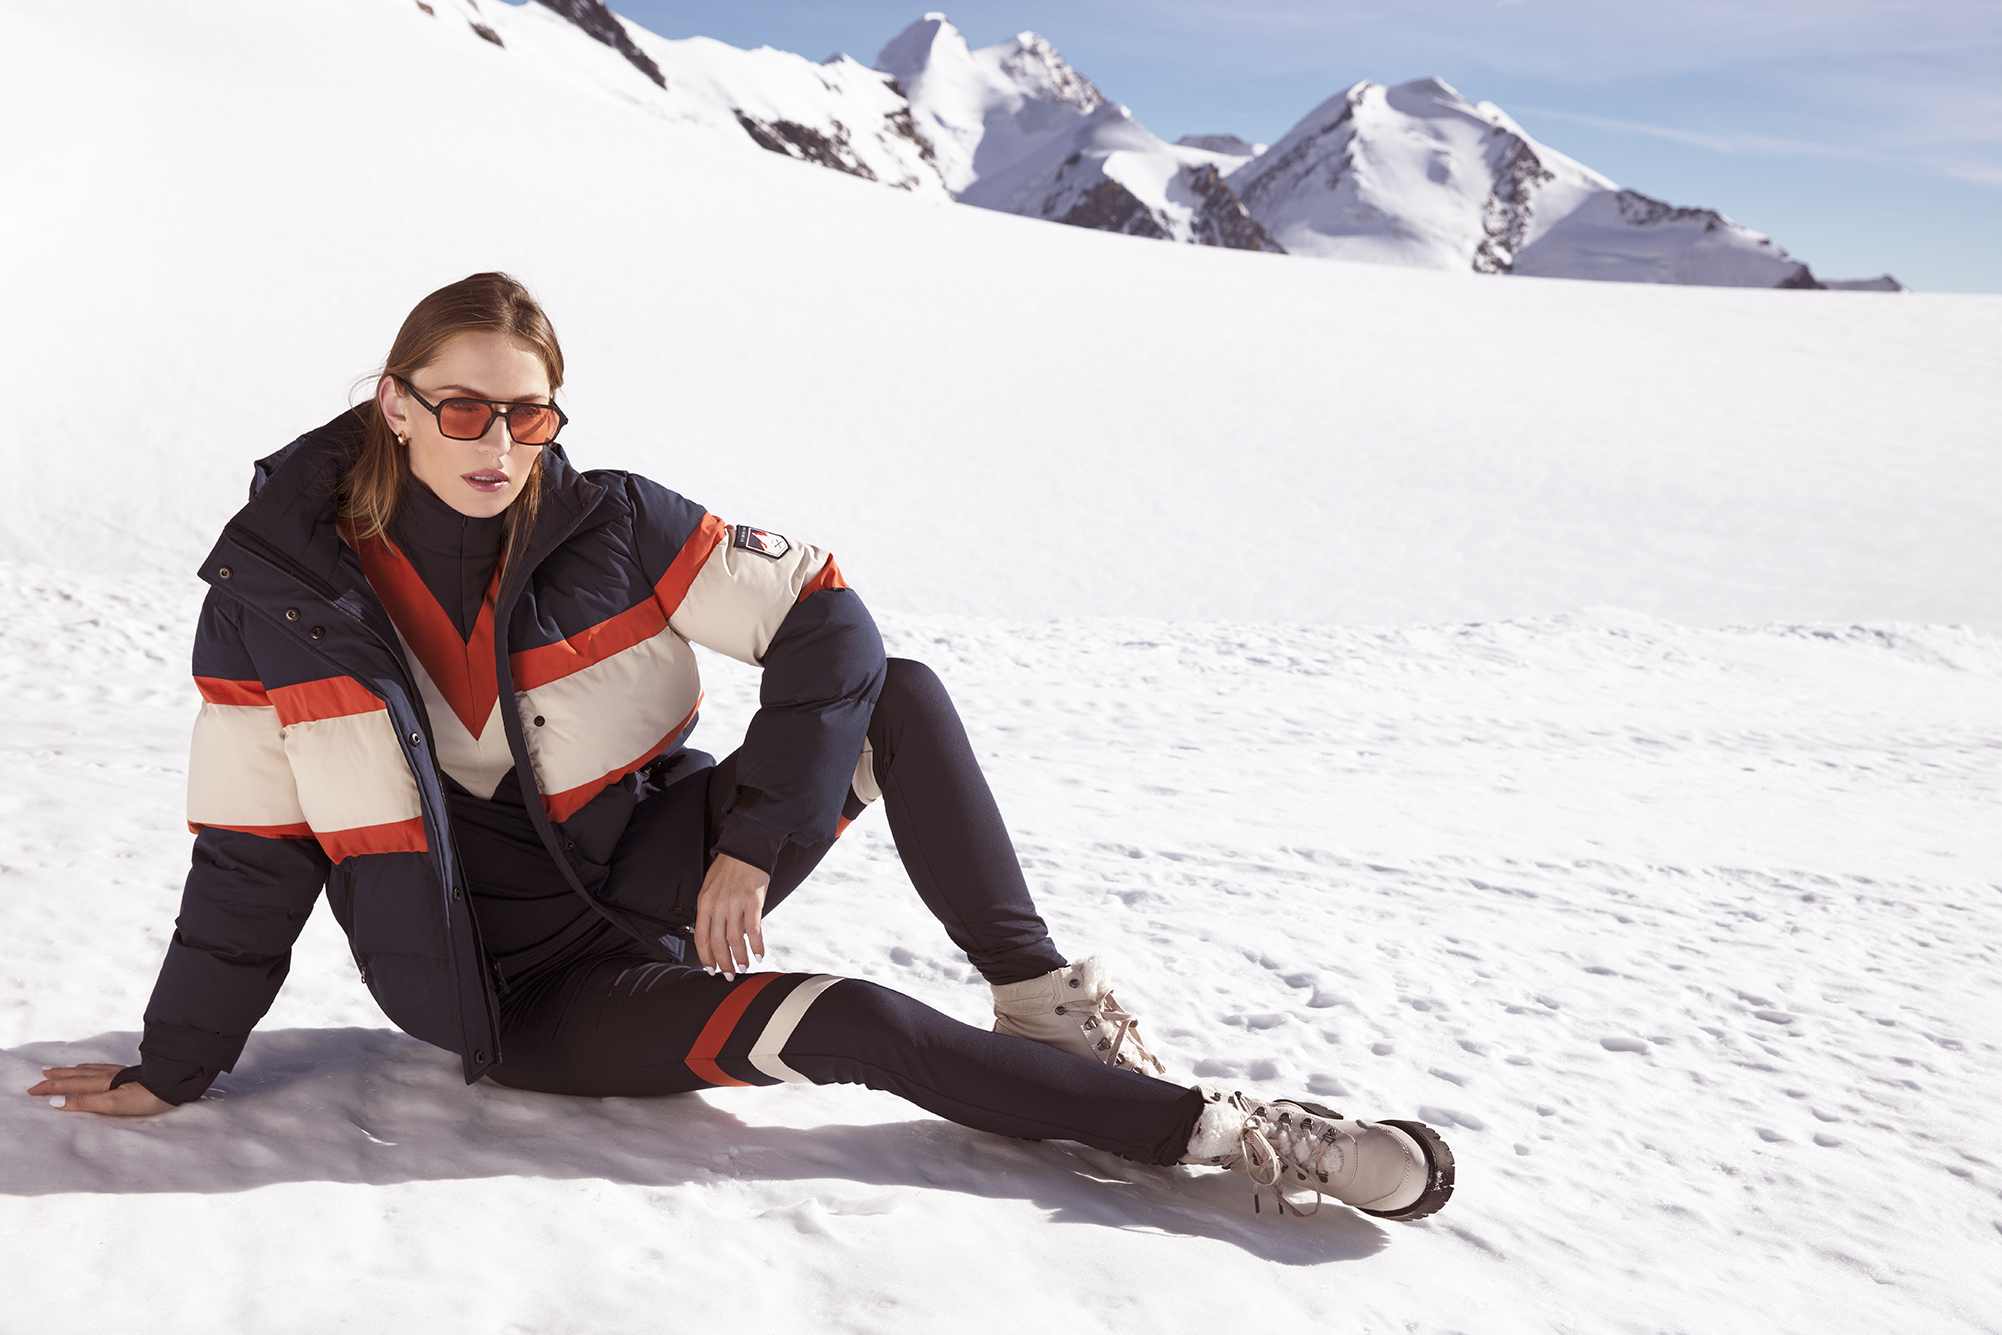 Why The Ski Capsule from By Malina is the ultimate ski collection you need for winter 21/22. 107